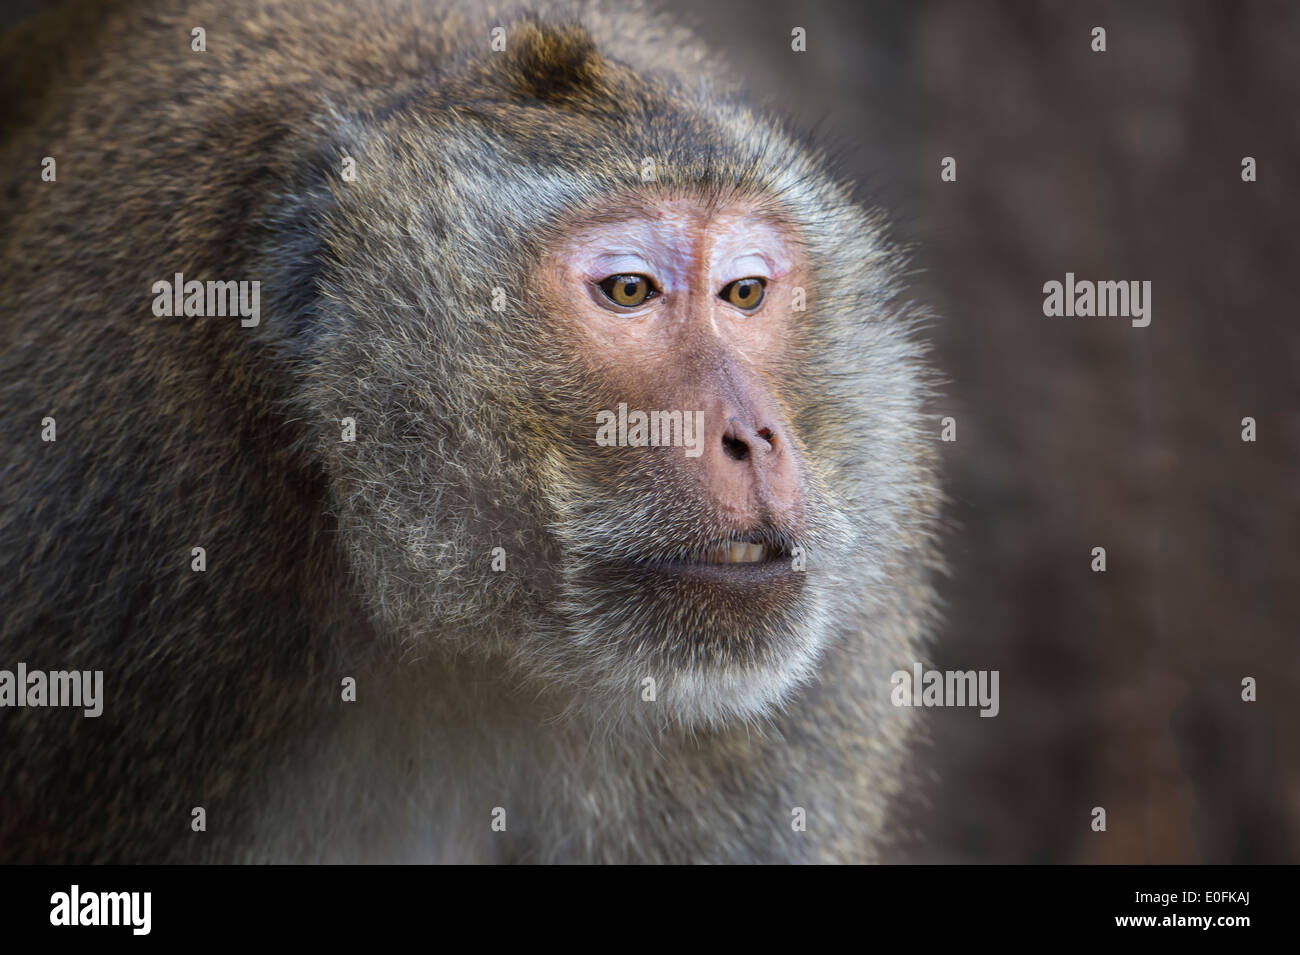 Portrait of an adult Long-tailed Macaque or Crab-eating Macaque (Macaca fascicularis), Thailand, Asia Stock Photo